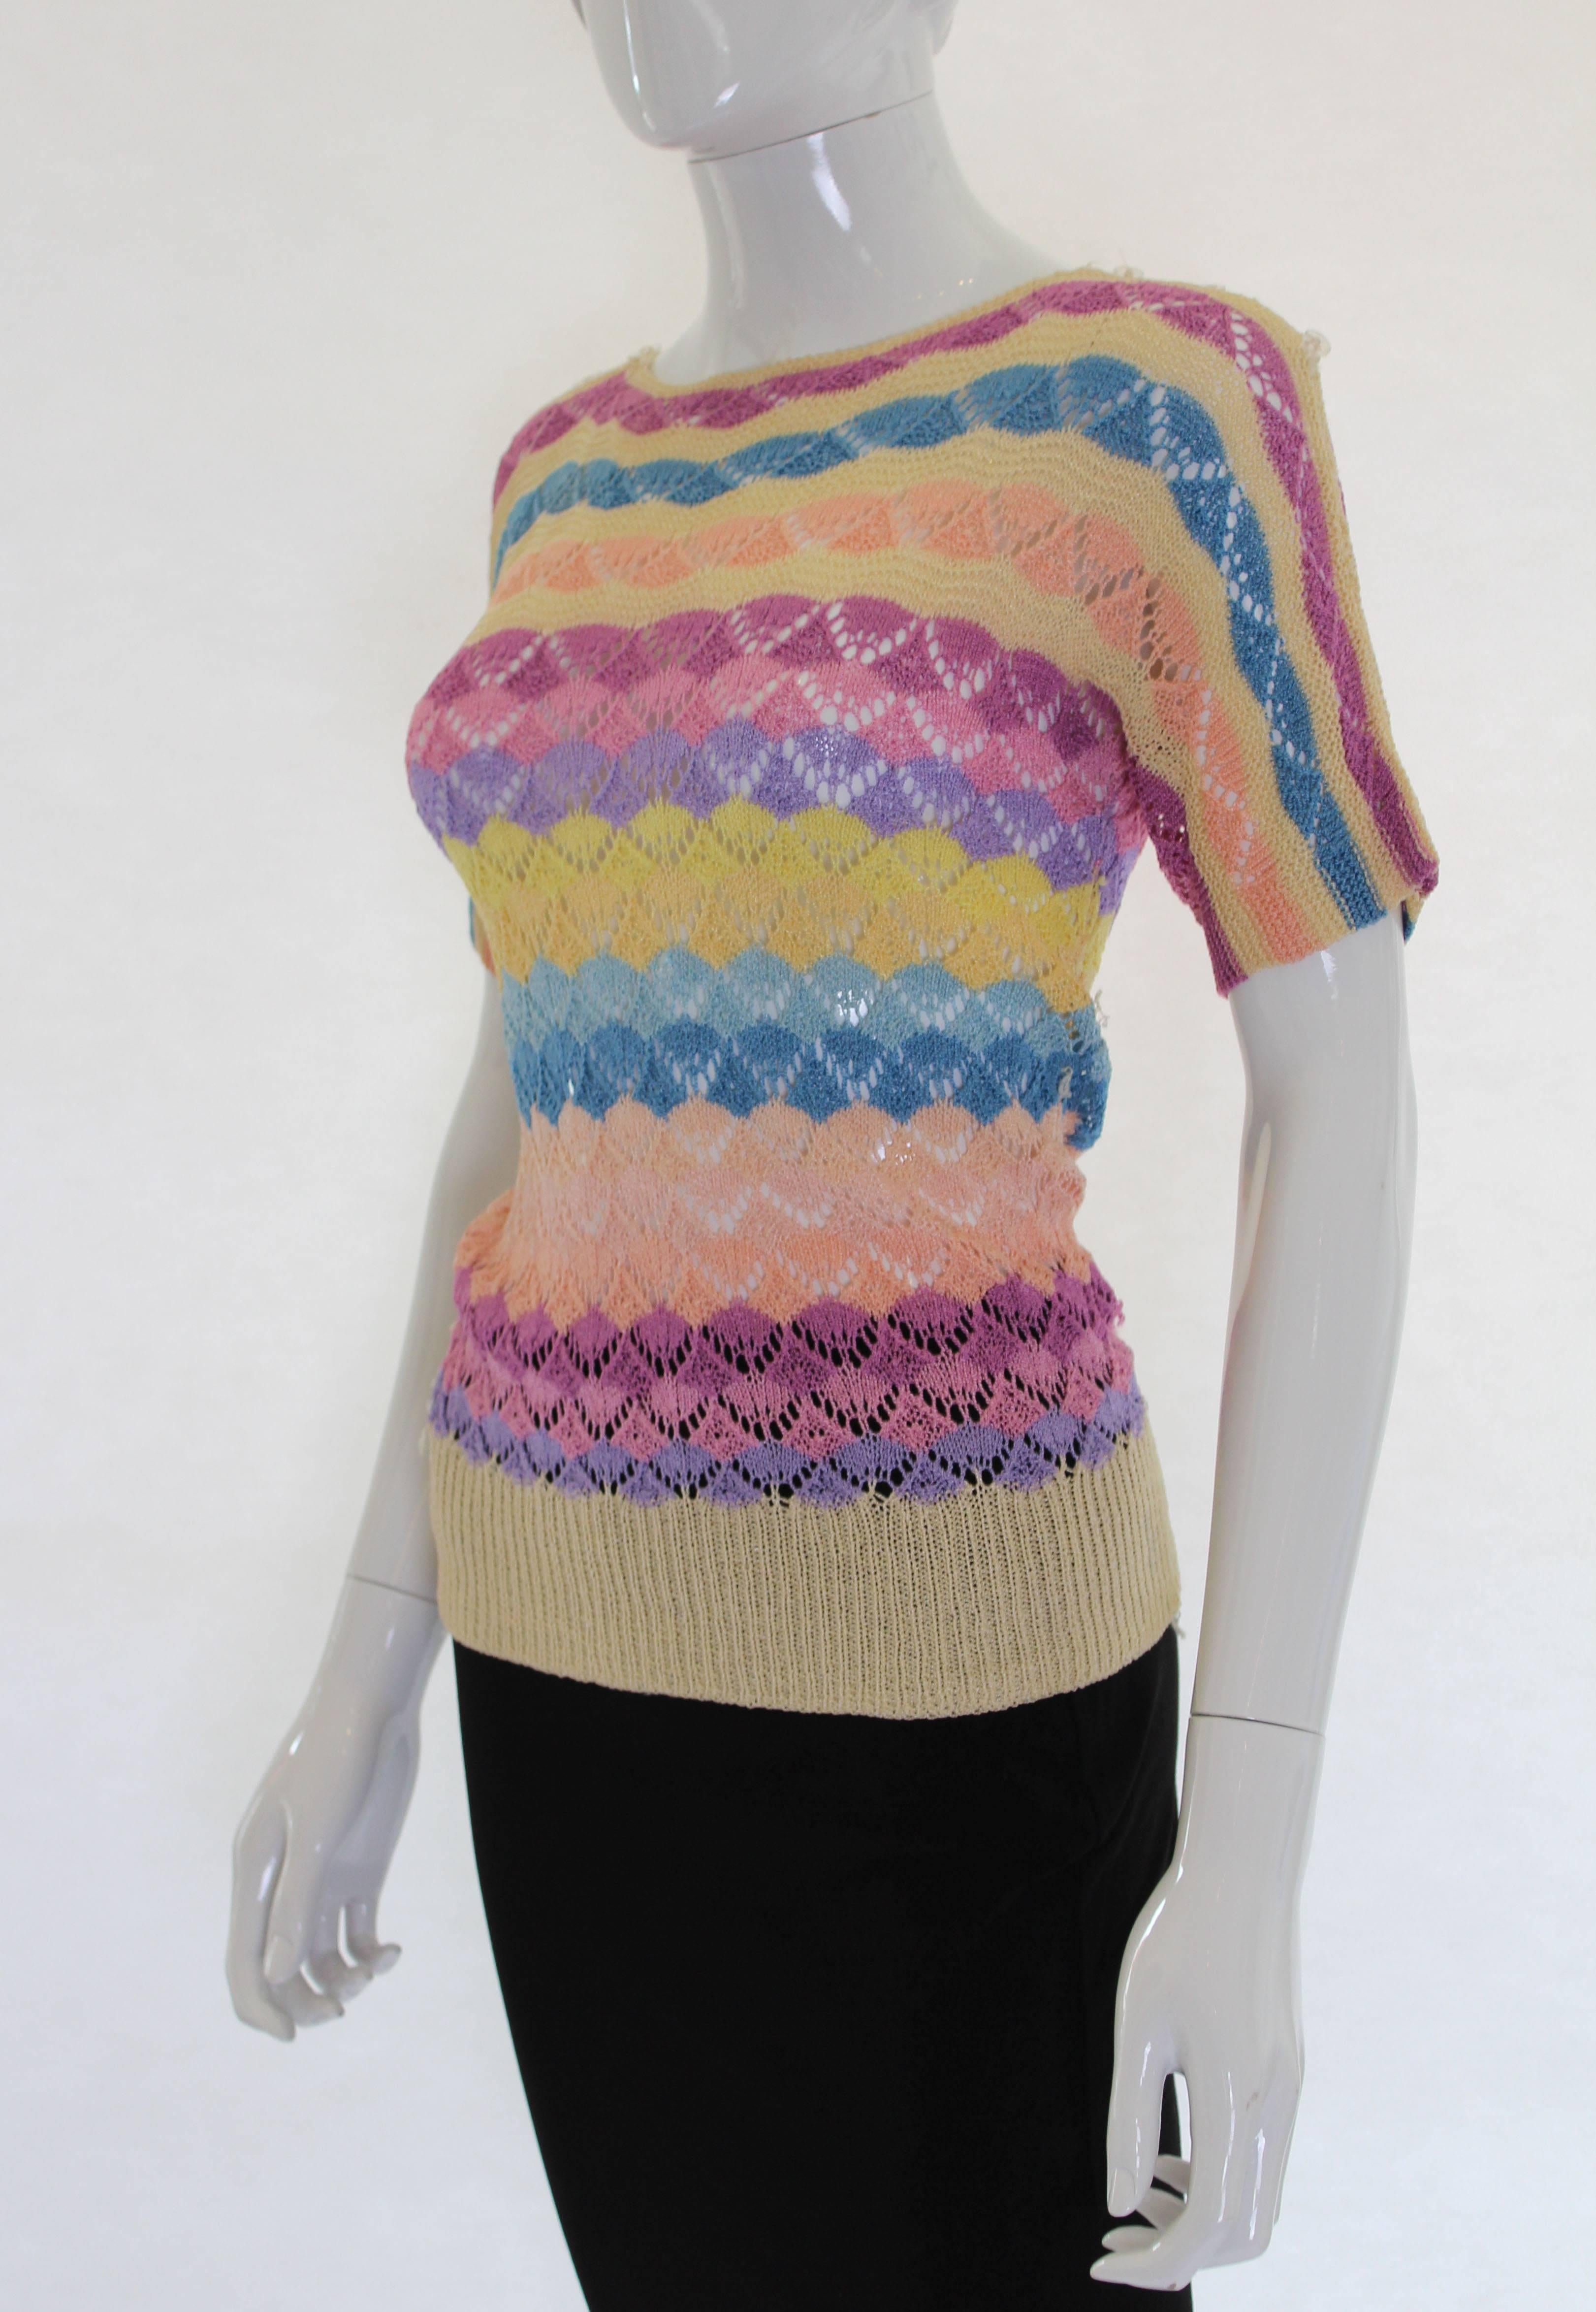 A super jumper for Summer, this 1920s crochet jumper is in a wonderful range of soft summer colours. It has a button opening on both shoulders with 3 buttons, and short sleeves. It is a size 10/12.
Bust 38'', length 26'', sleeve length 7'